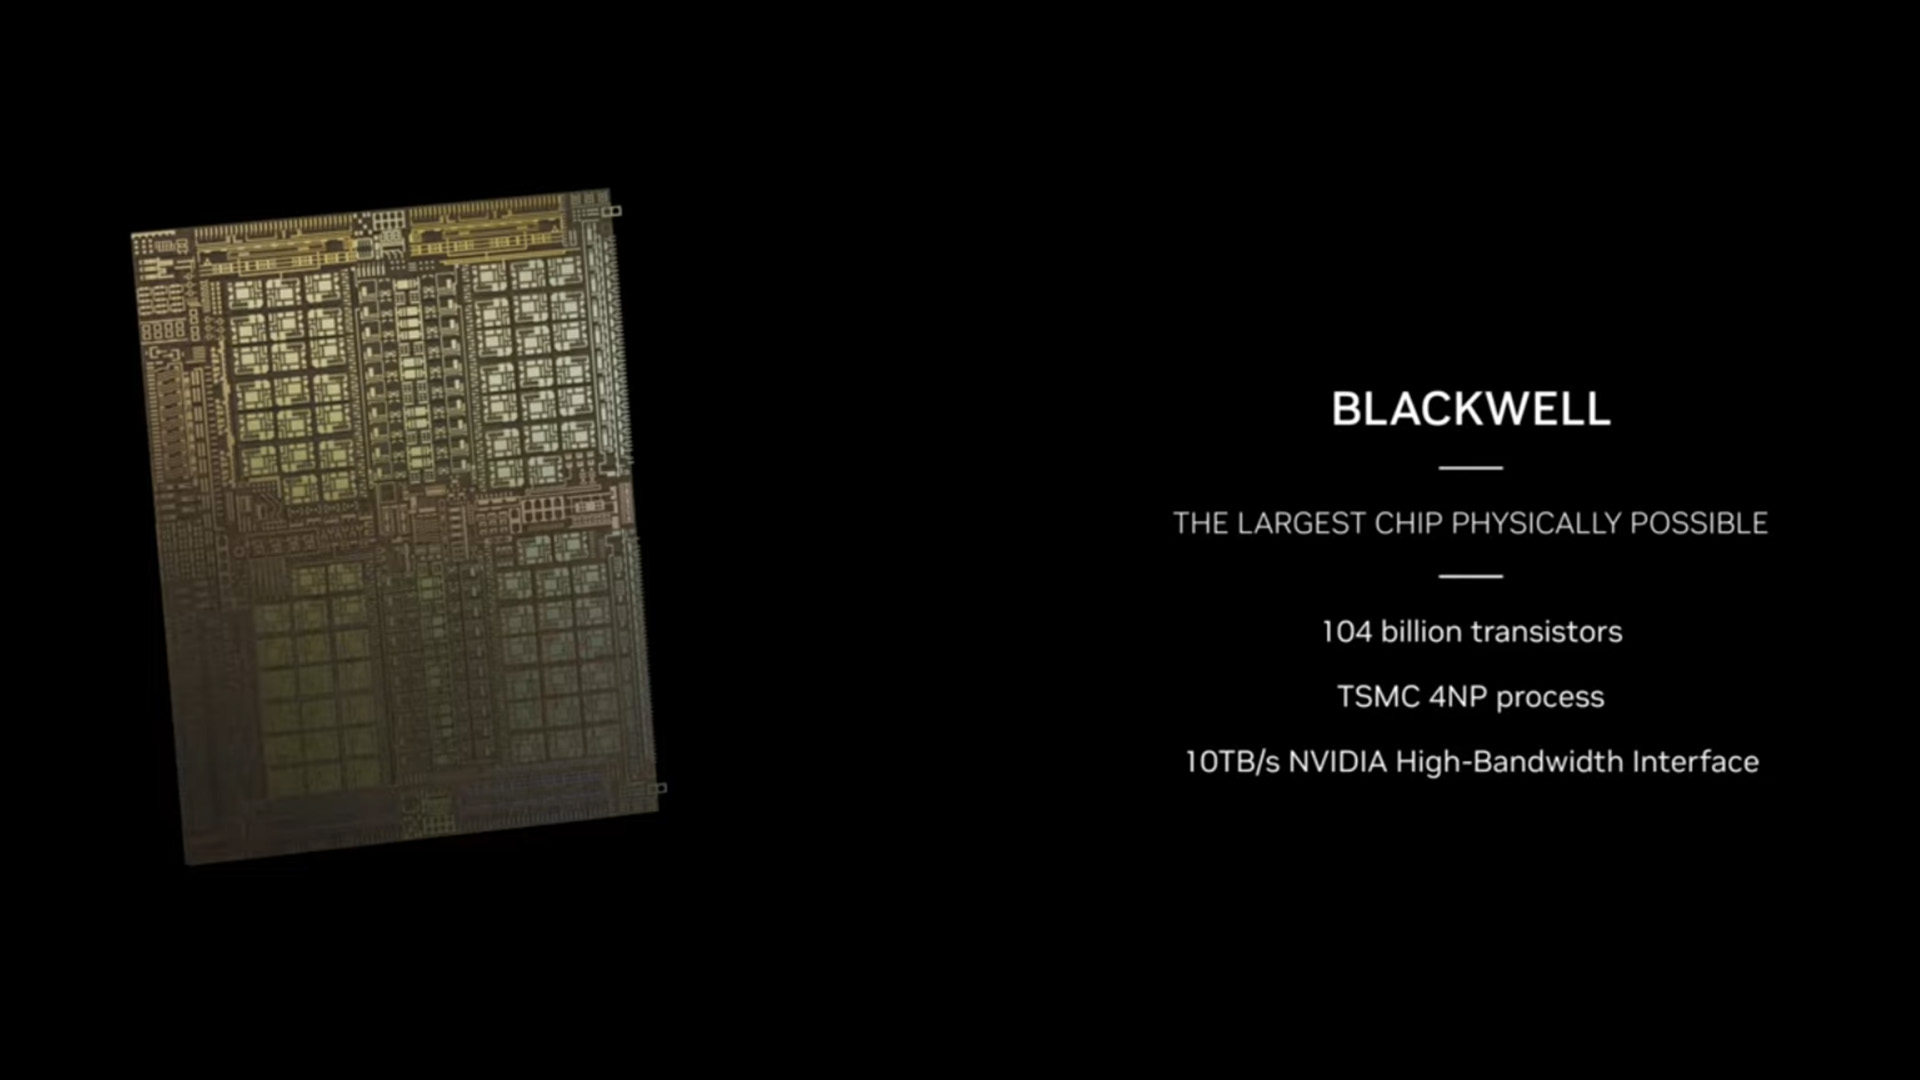 Images of Nvidia's Blackwell GPU from GTC.